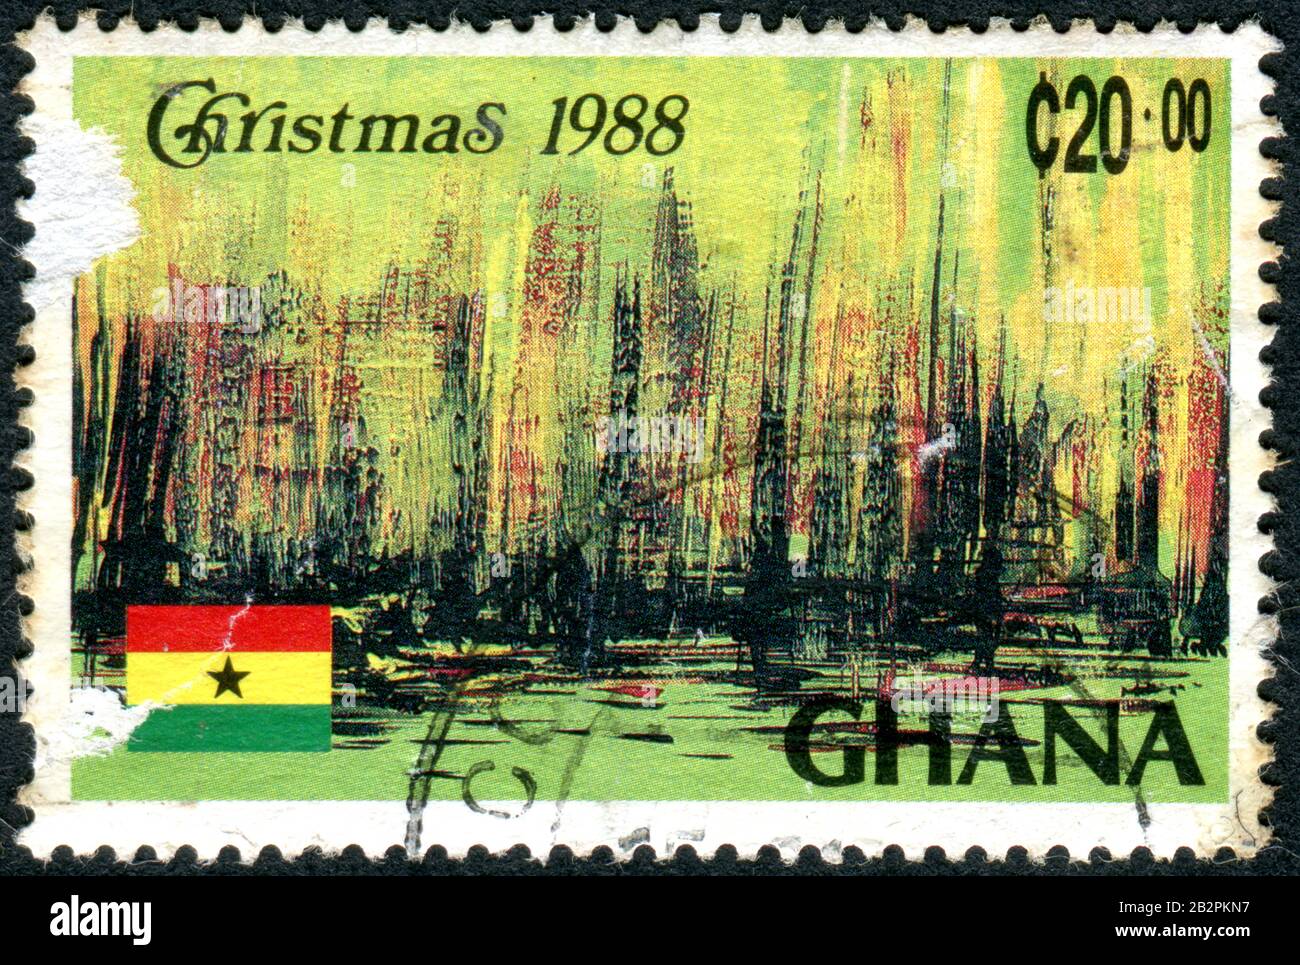 GHANA - CIRCA 1988: A stamp printed in Ghana, Christmas issue, depicted the Christmas Symbolism, circa 1988 Stock Photo